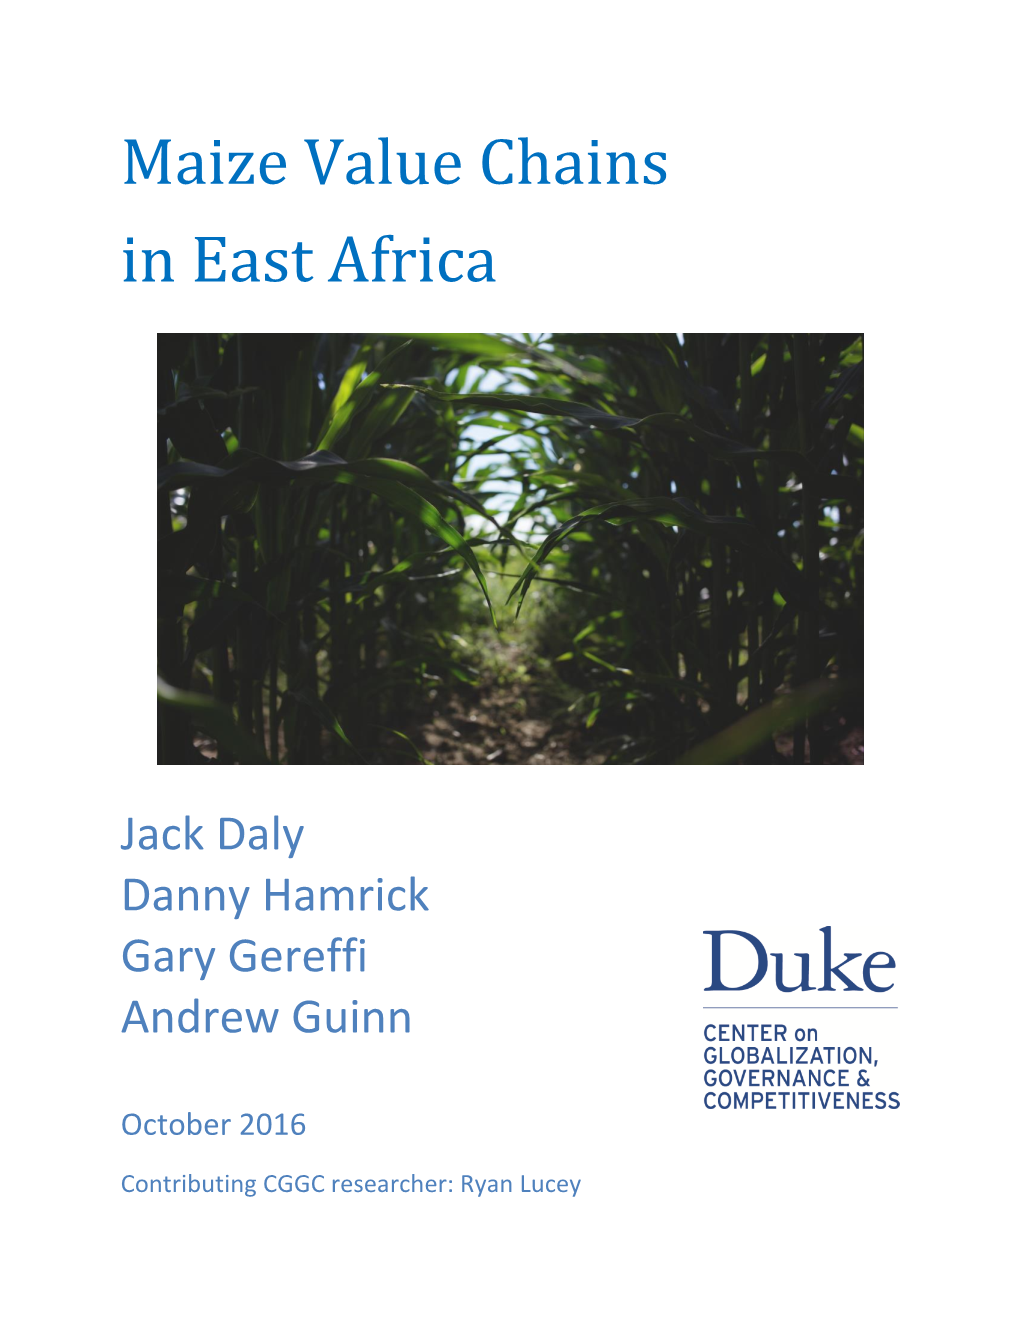 Maize Value Chains in East Africa